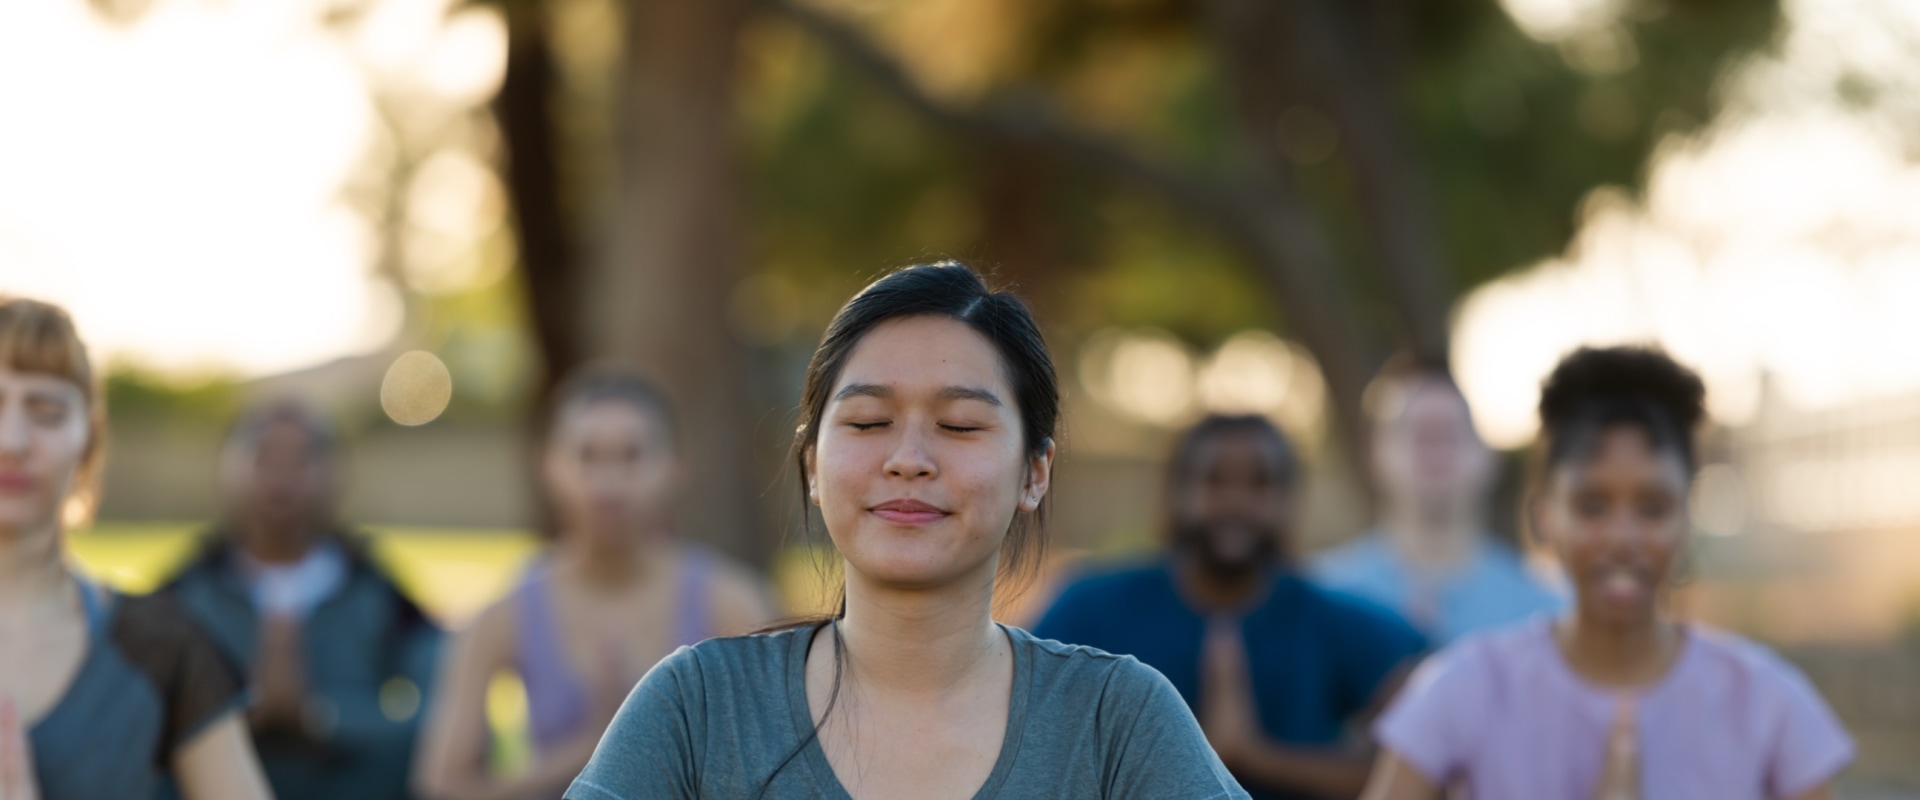 What are 5 mindfulness exercises?